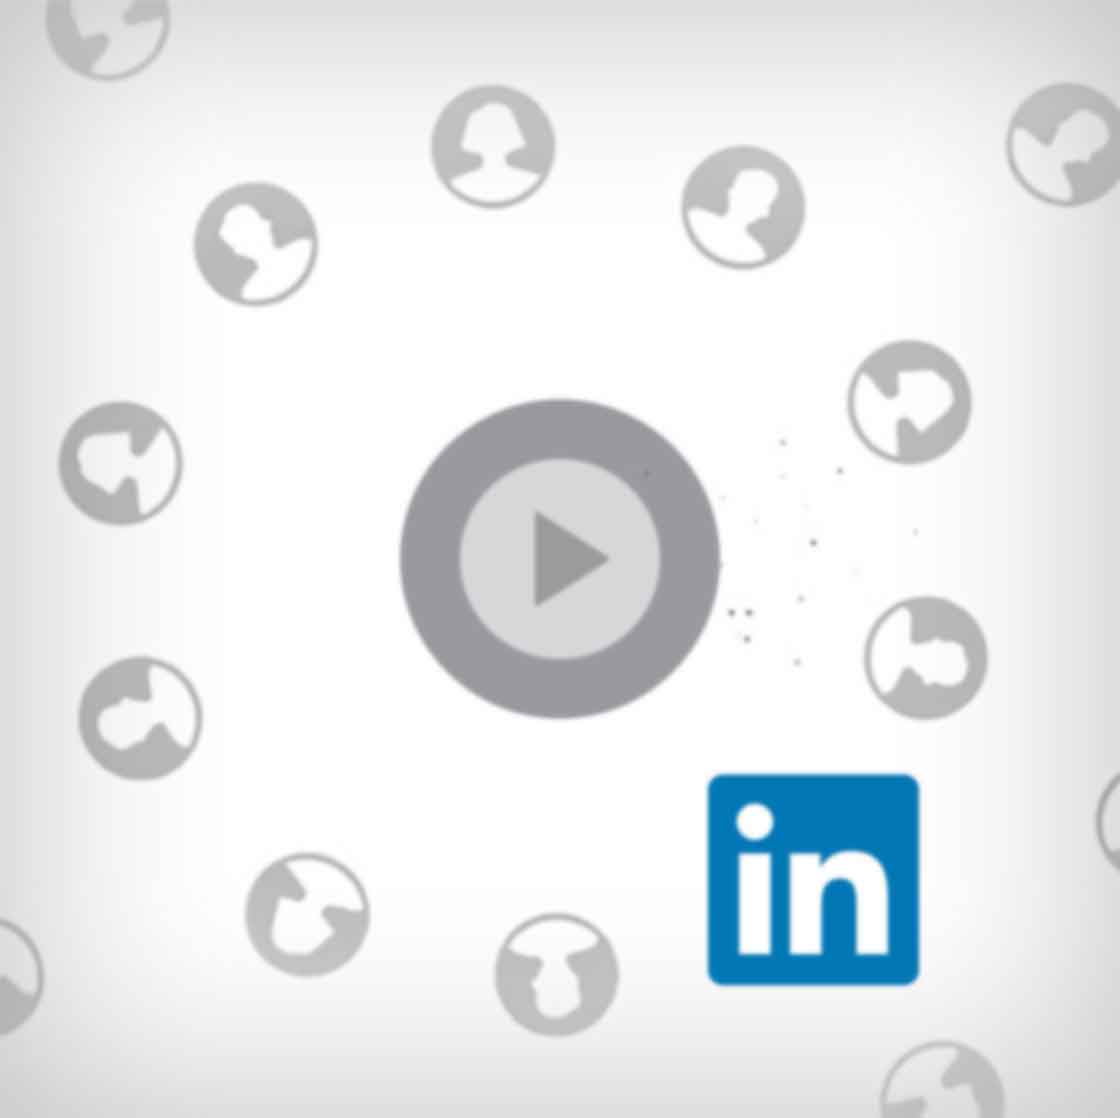 Marketing, corporate communications, and PR campaigns for Linkedin